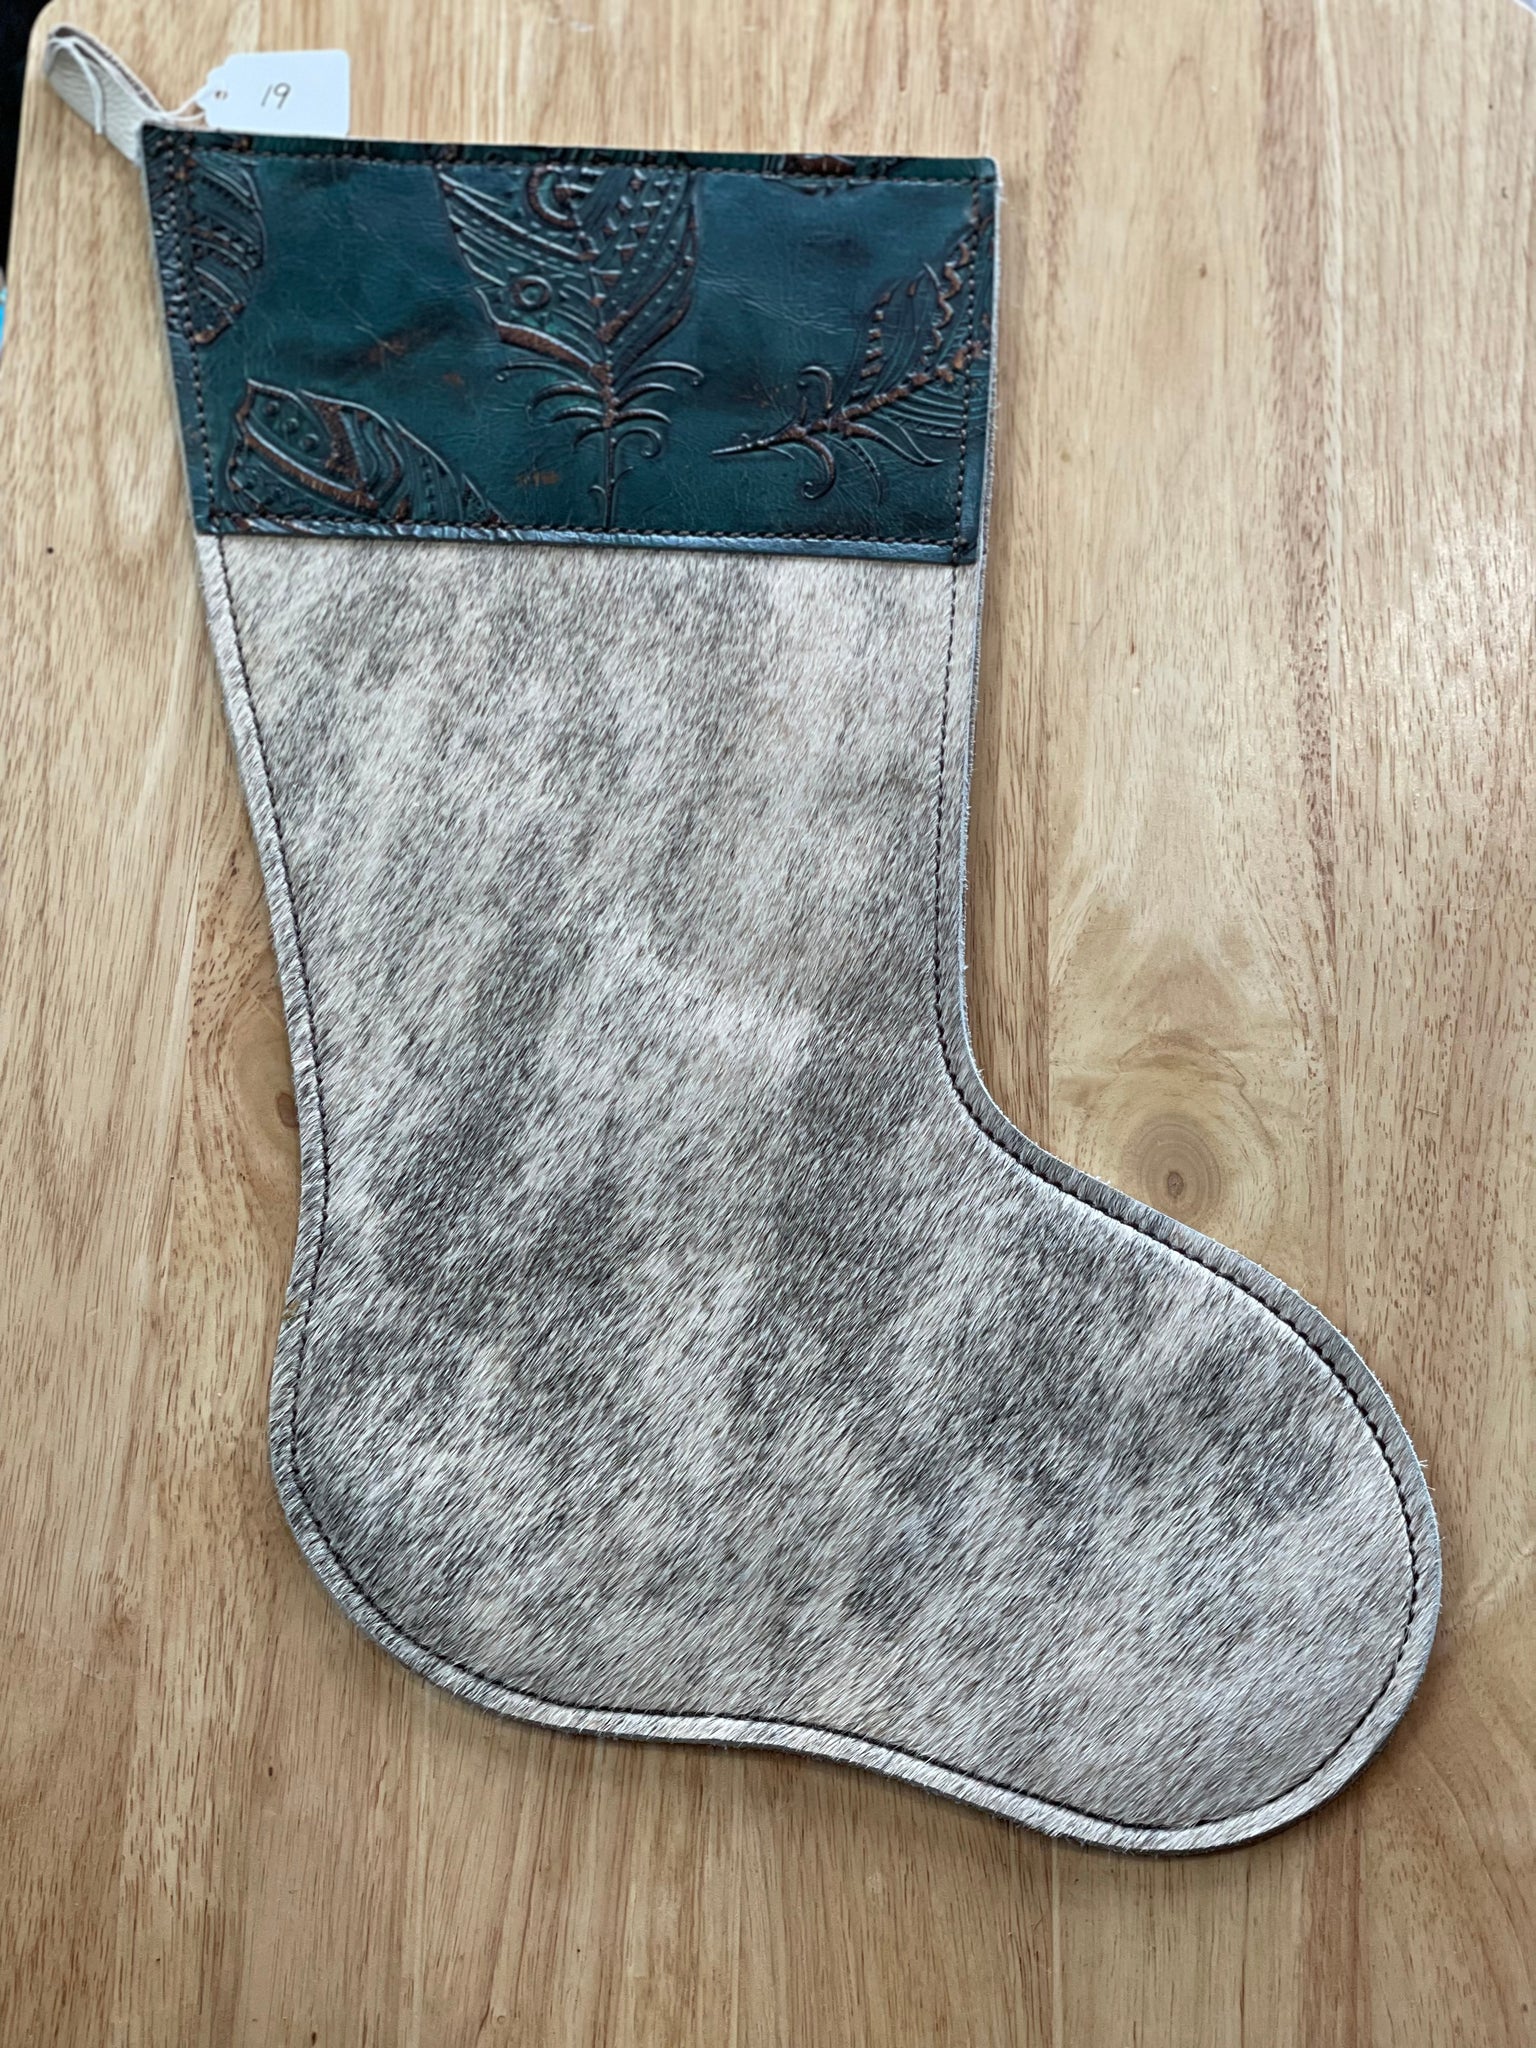 Cowhide and Leather Christmas Stocking #19